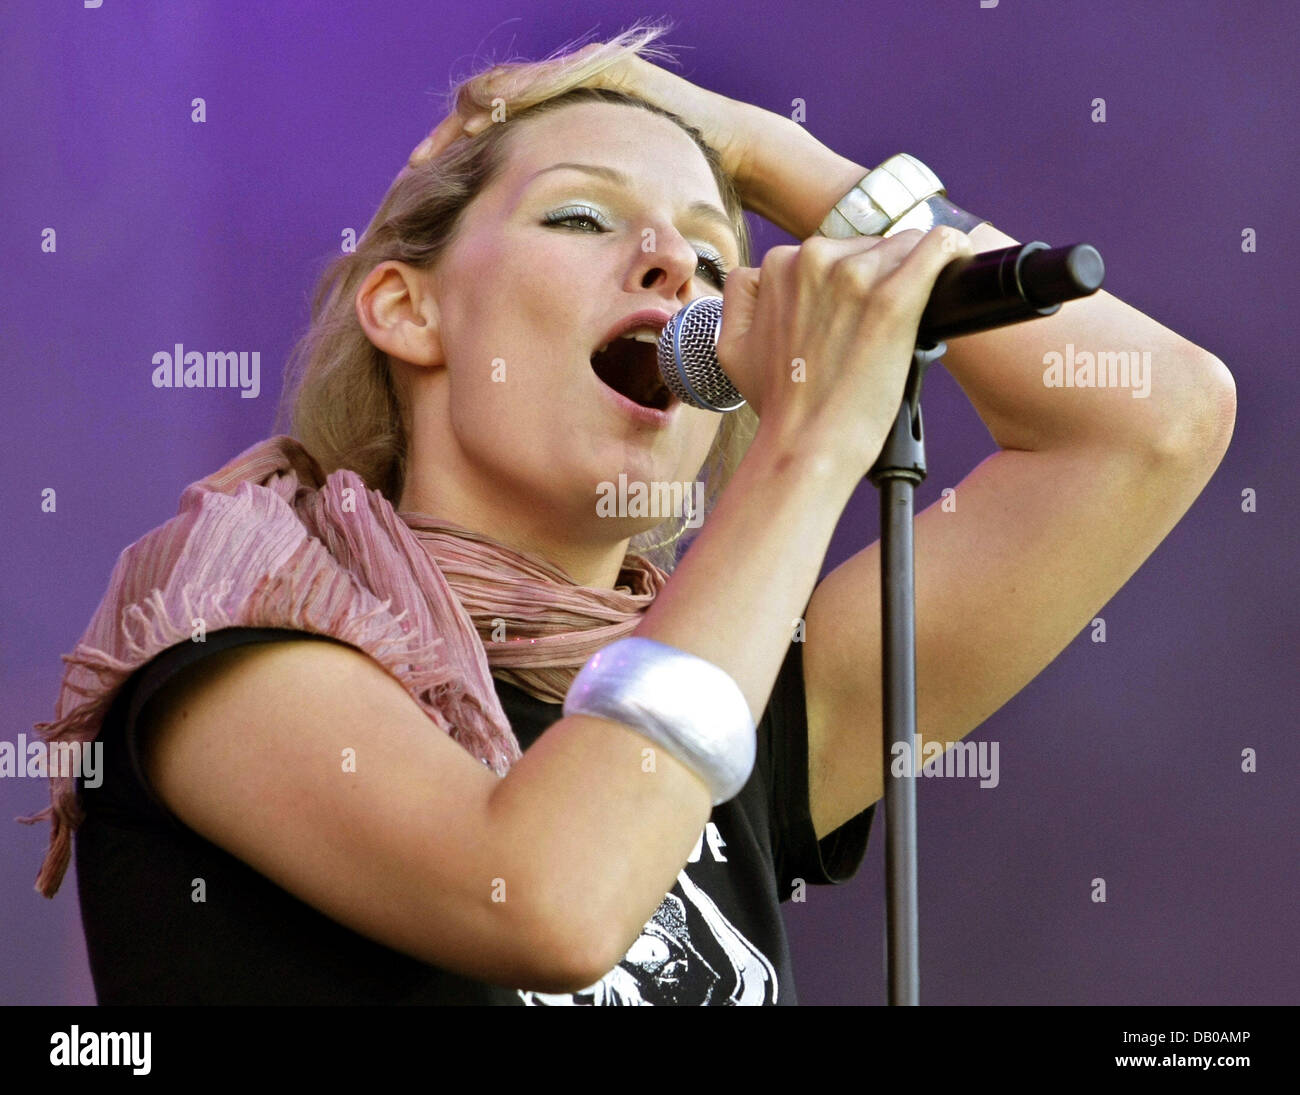 Singer of German pop-band Juli, Eva Briegel, performs during  Baden-Wuerttemberg's largest free music festival 'Arena of Pop' at Mannheim  Palace Square in Mannheim, Germany, 28 July 2007. The concert is carried by